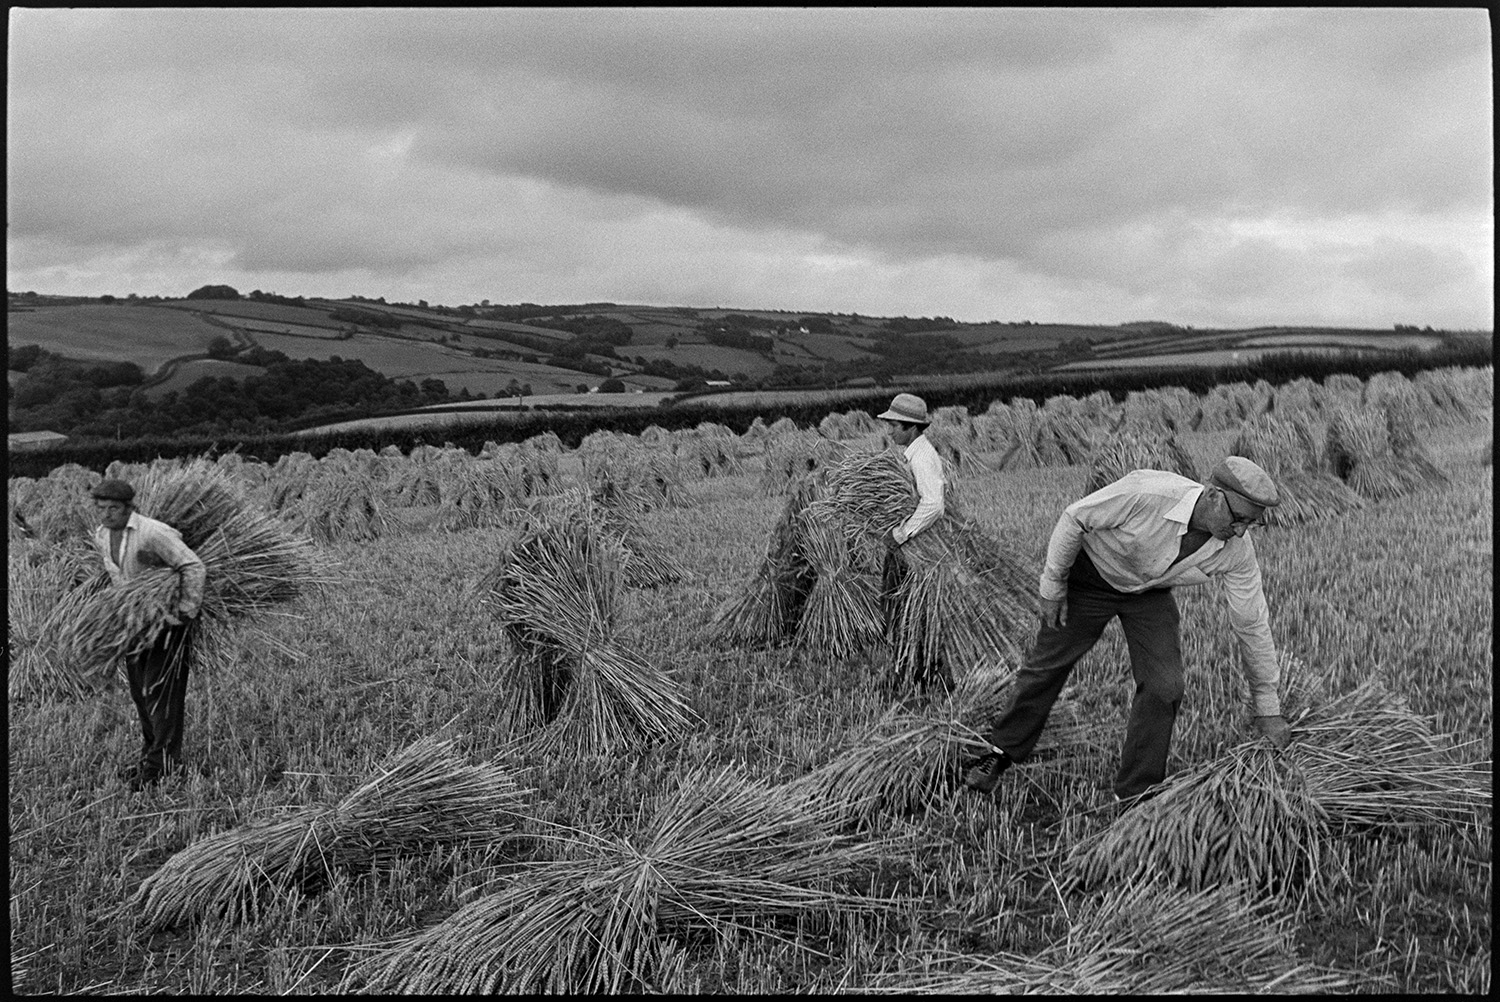 Men setting up stooks, reap and binder parked in field.
[Three men setting up stooks of corn in a field at Spittle, Chulmleigh, with a view of surrounding fields, hedges and clouds in the sky.]